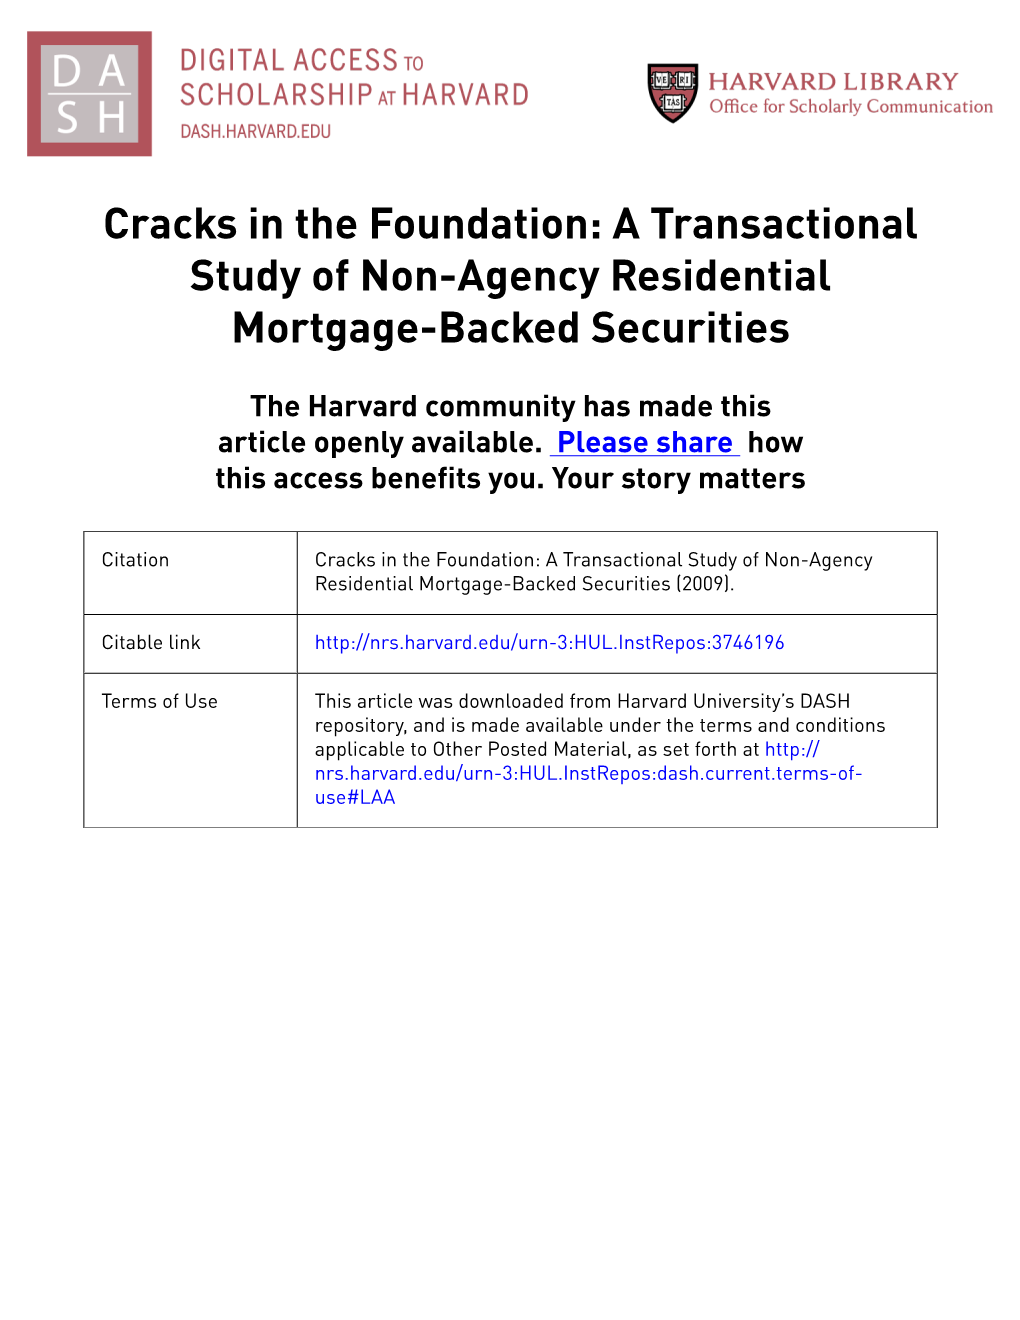 Cracks in the Foundation: a Transactional Study of Non-Agency Residential Mortgage-Backed Securities